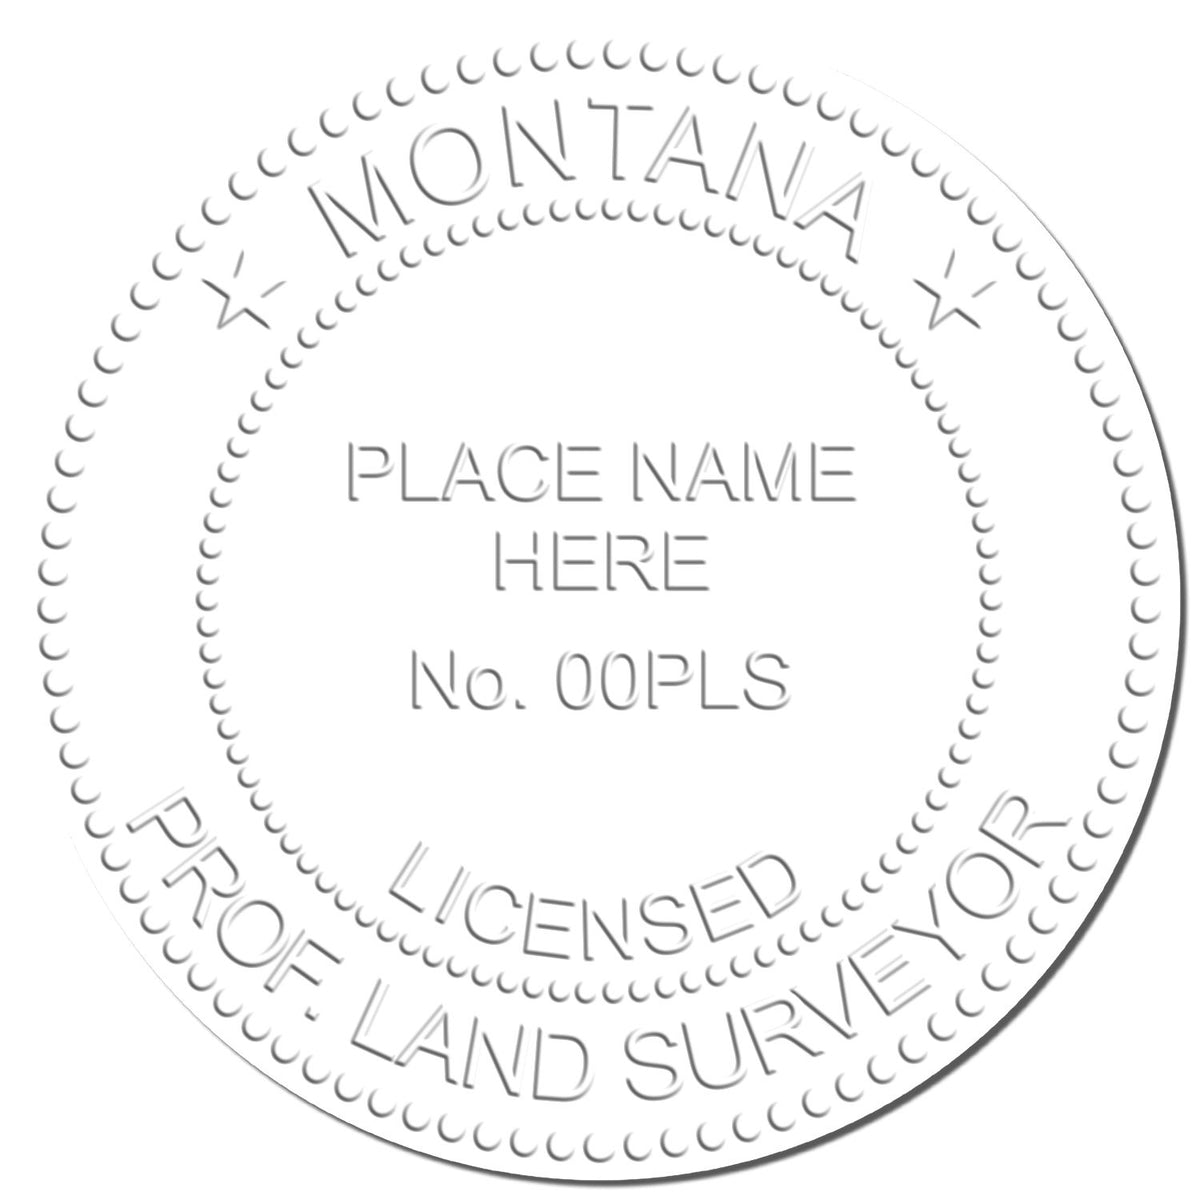 This paper is stamped with a sample imprint of the Gift Montana Land Surveyor Seal, signifying its quality and reliability.